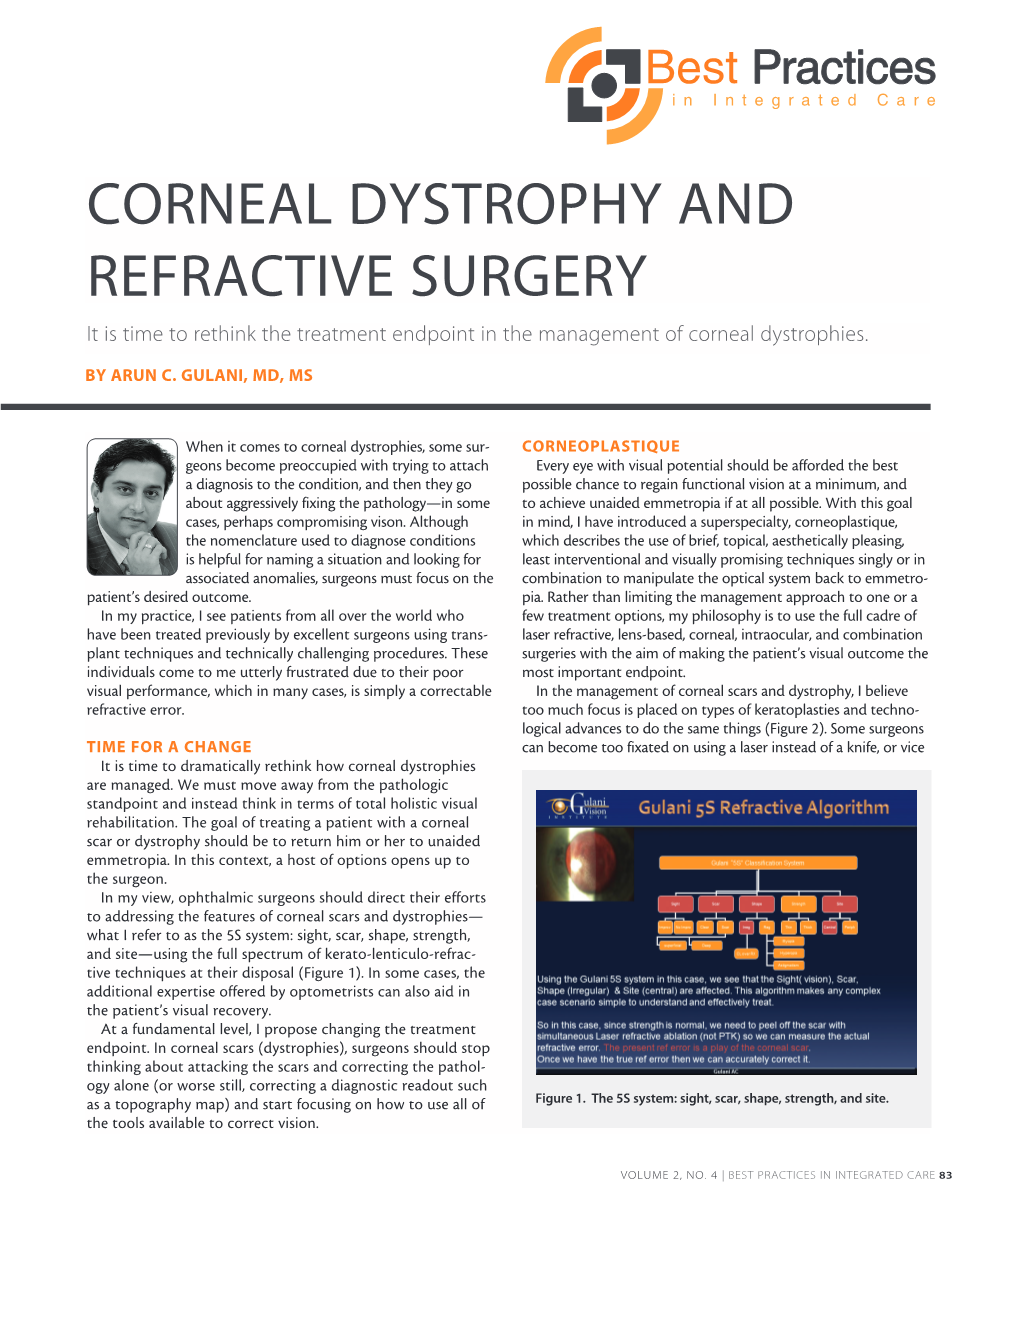 CORNEAL DYSTROPHY and REFRACTIVE SURGERY It Is Time to Rethink the Treatment Endpoint in the Management of Corneal Dystrophies